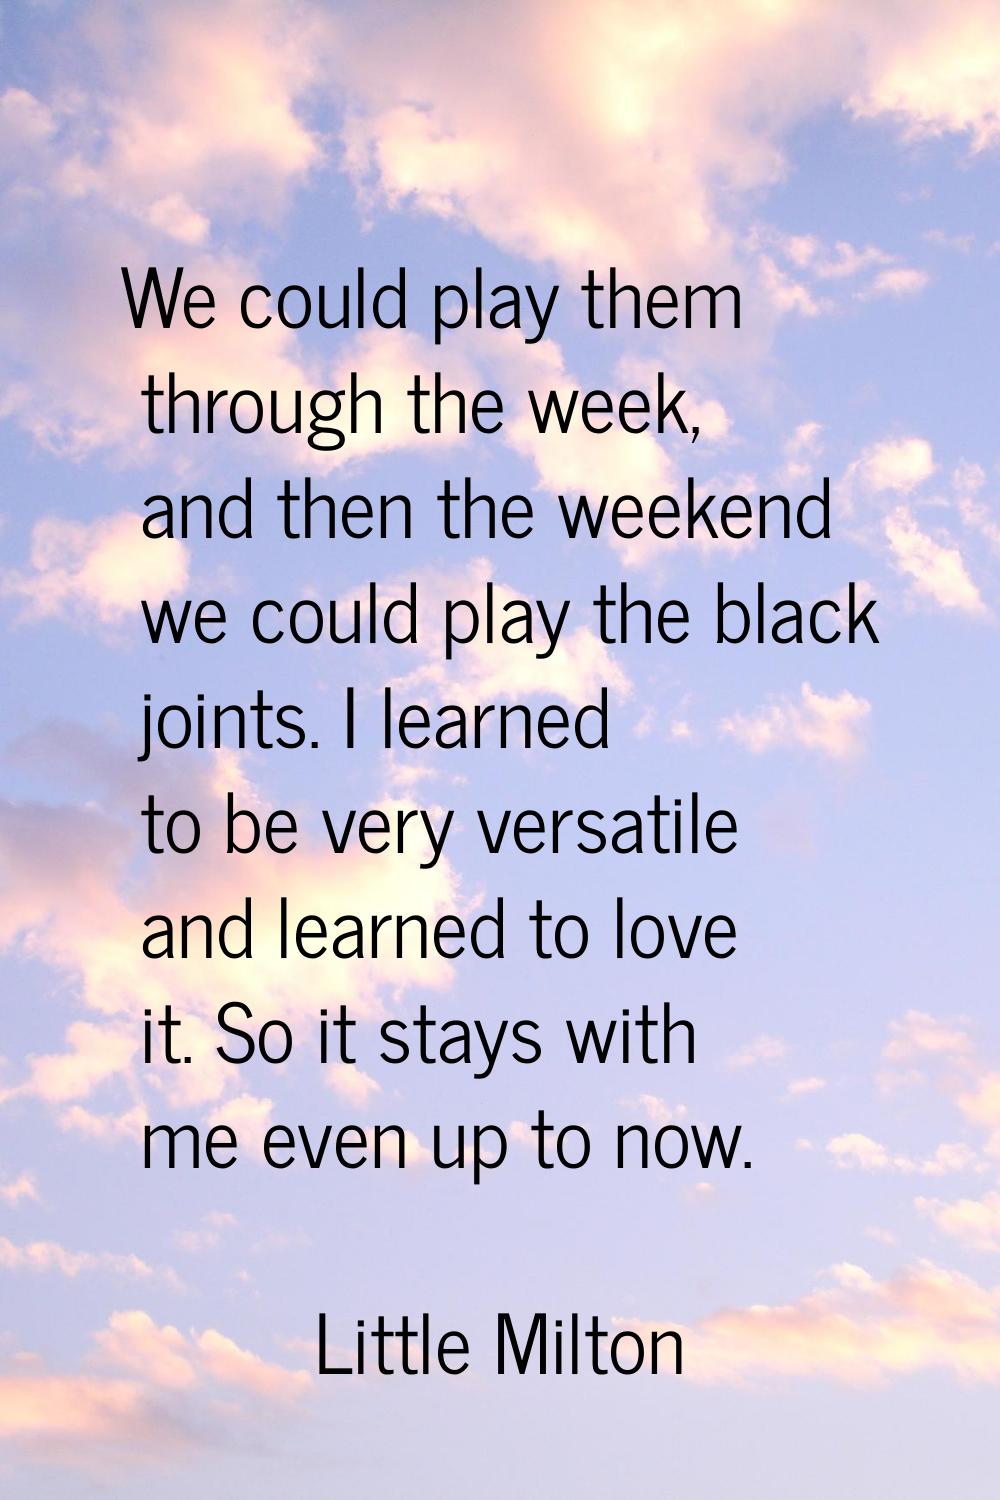 We could play them through the week, and then the weekend we could play the black joints. I learned